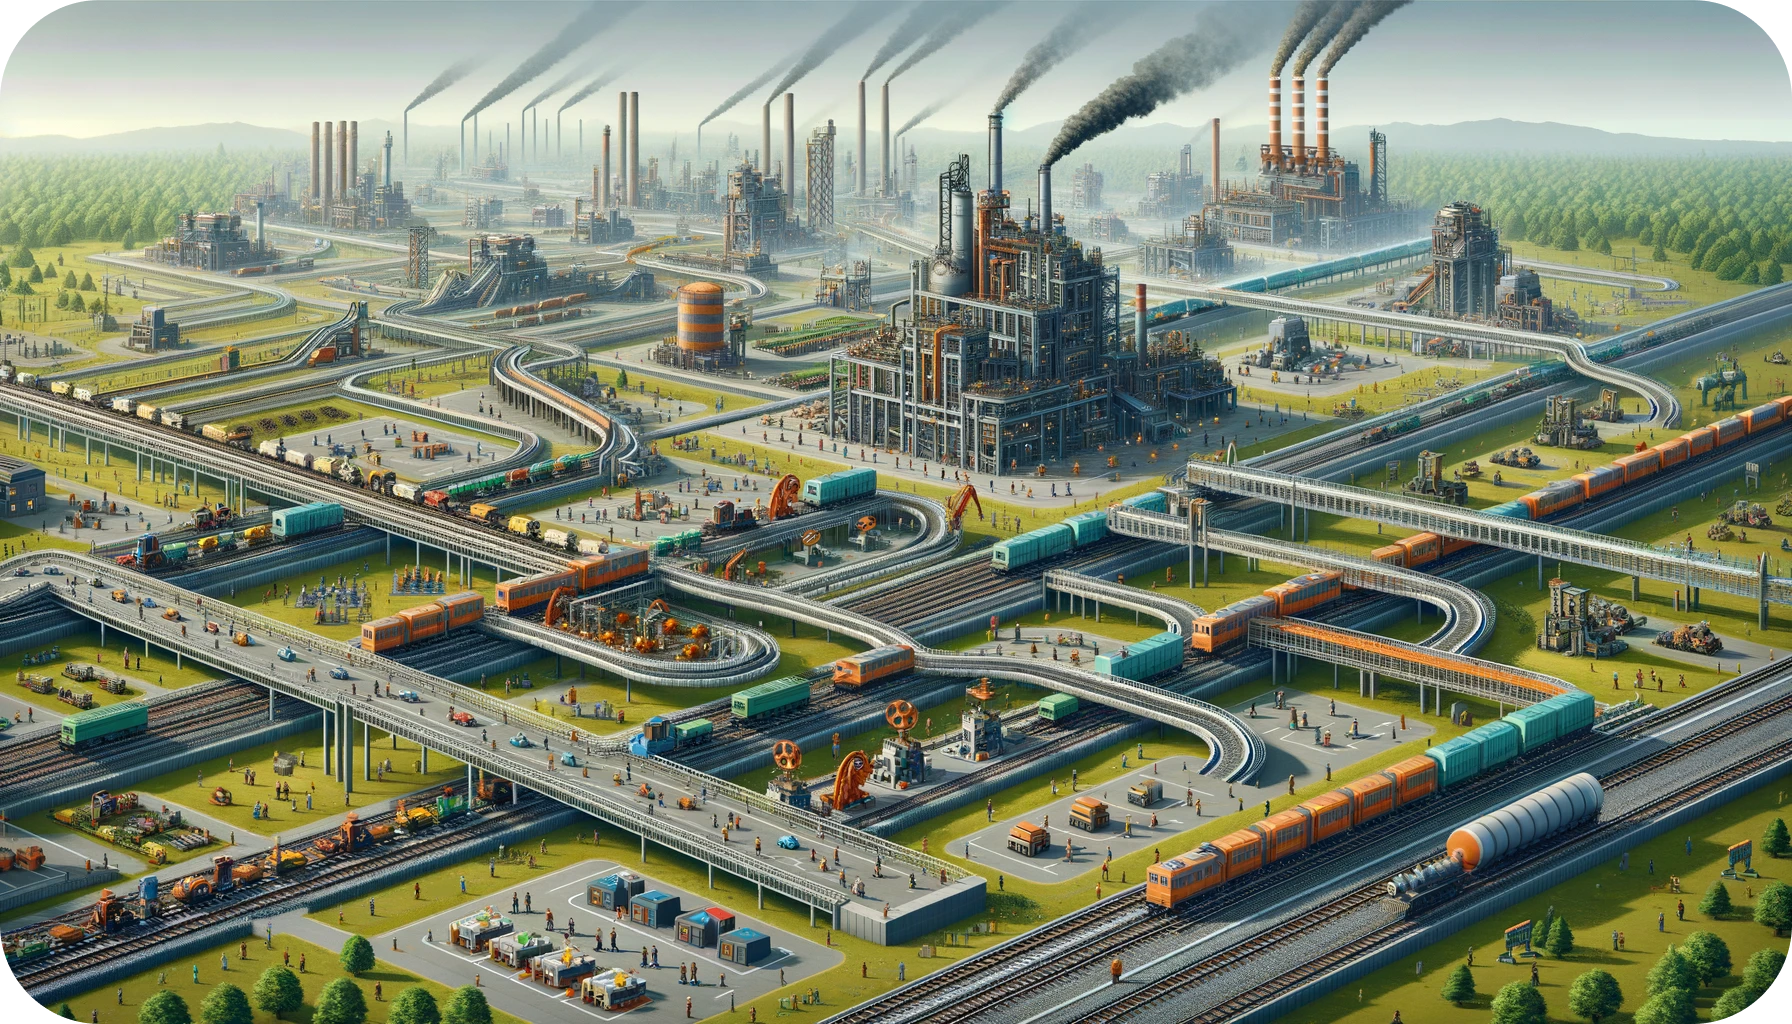 A vast and intricate factory landscape, with players strategizing and managing resources, reflecting the pinnacle of industrial achievement.